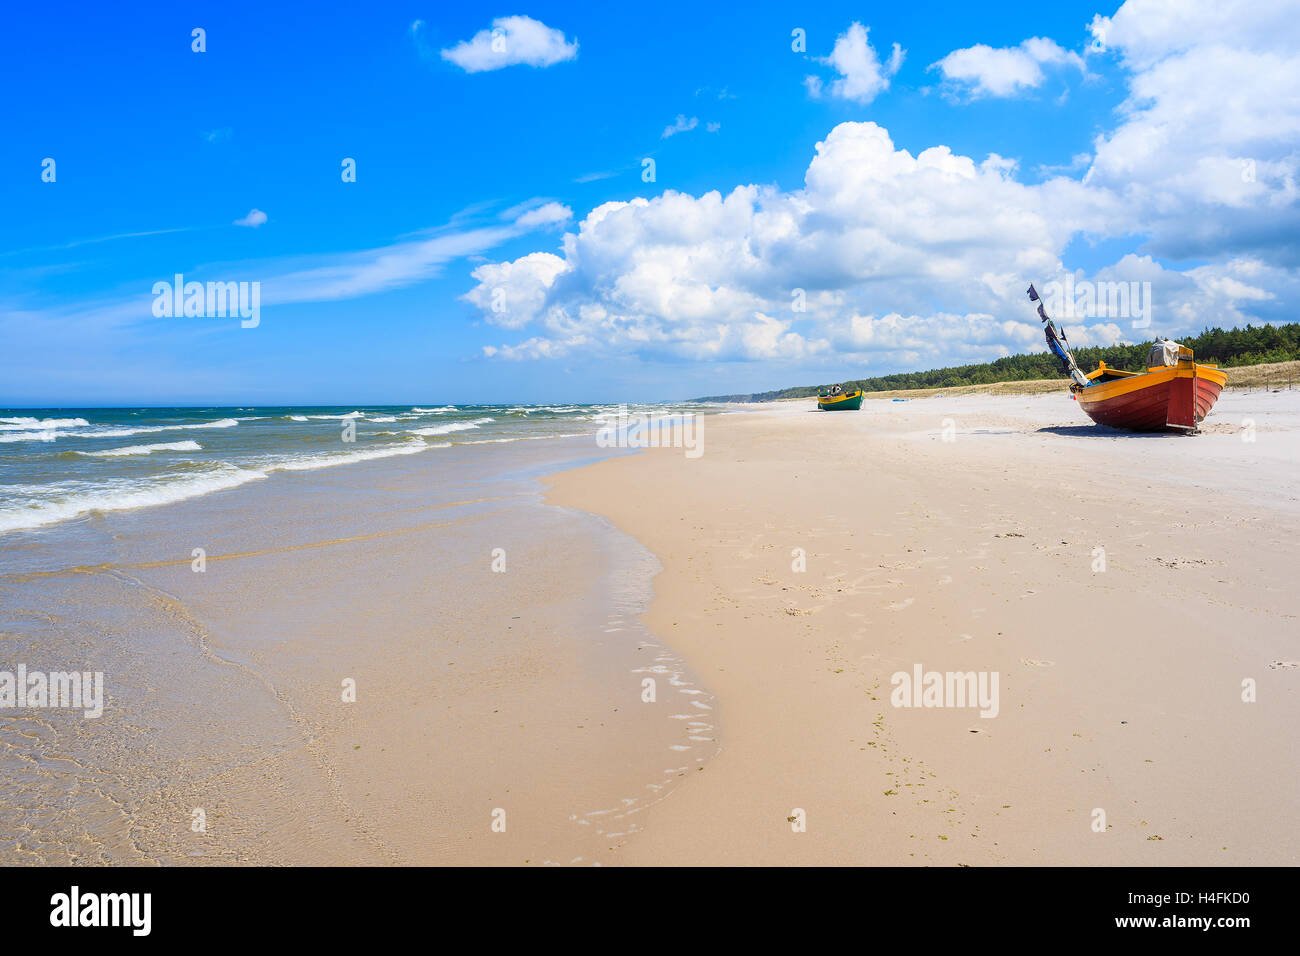 Sandy Baltic Sea beach and fishing boats on shore in background, Poland Stock Photo